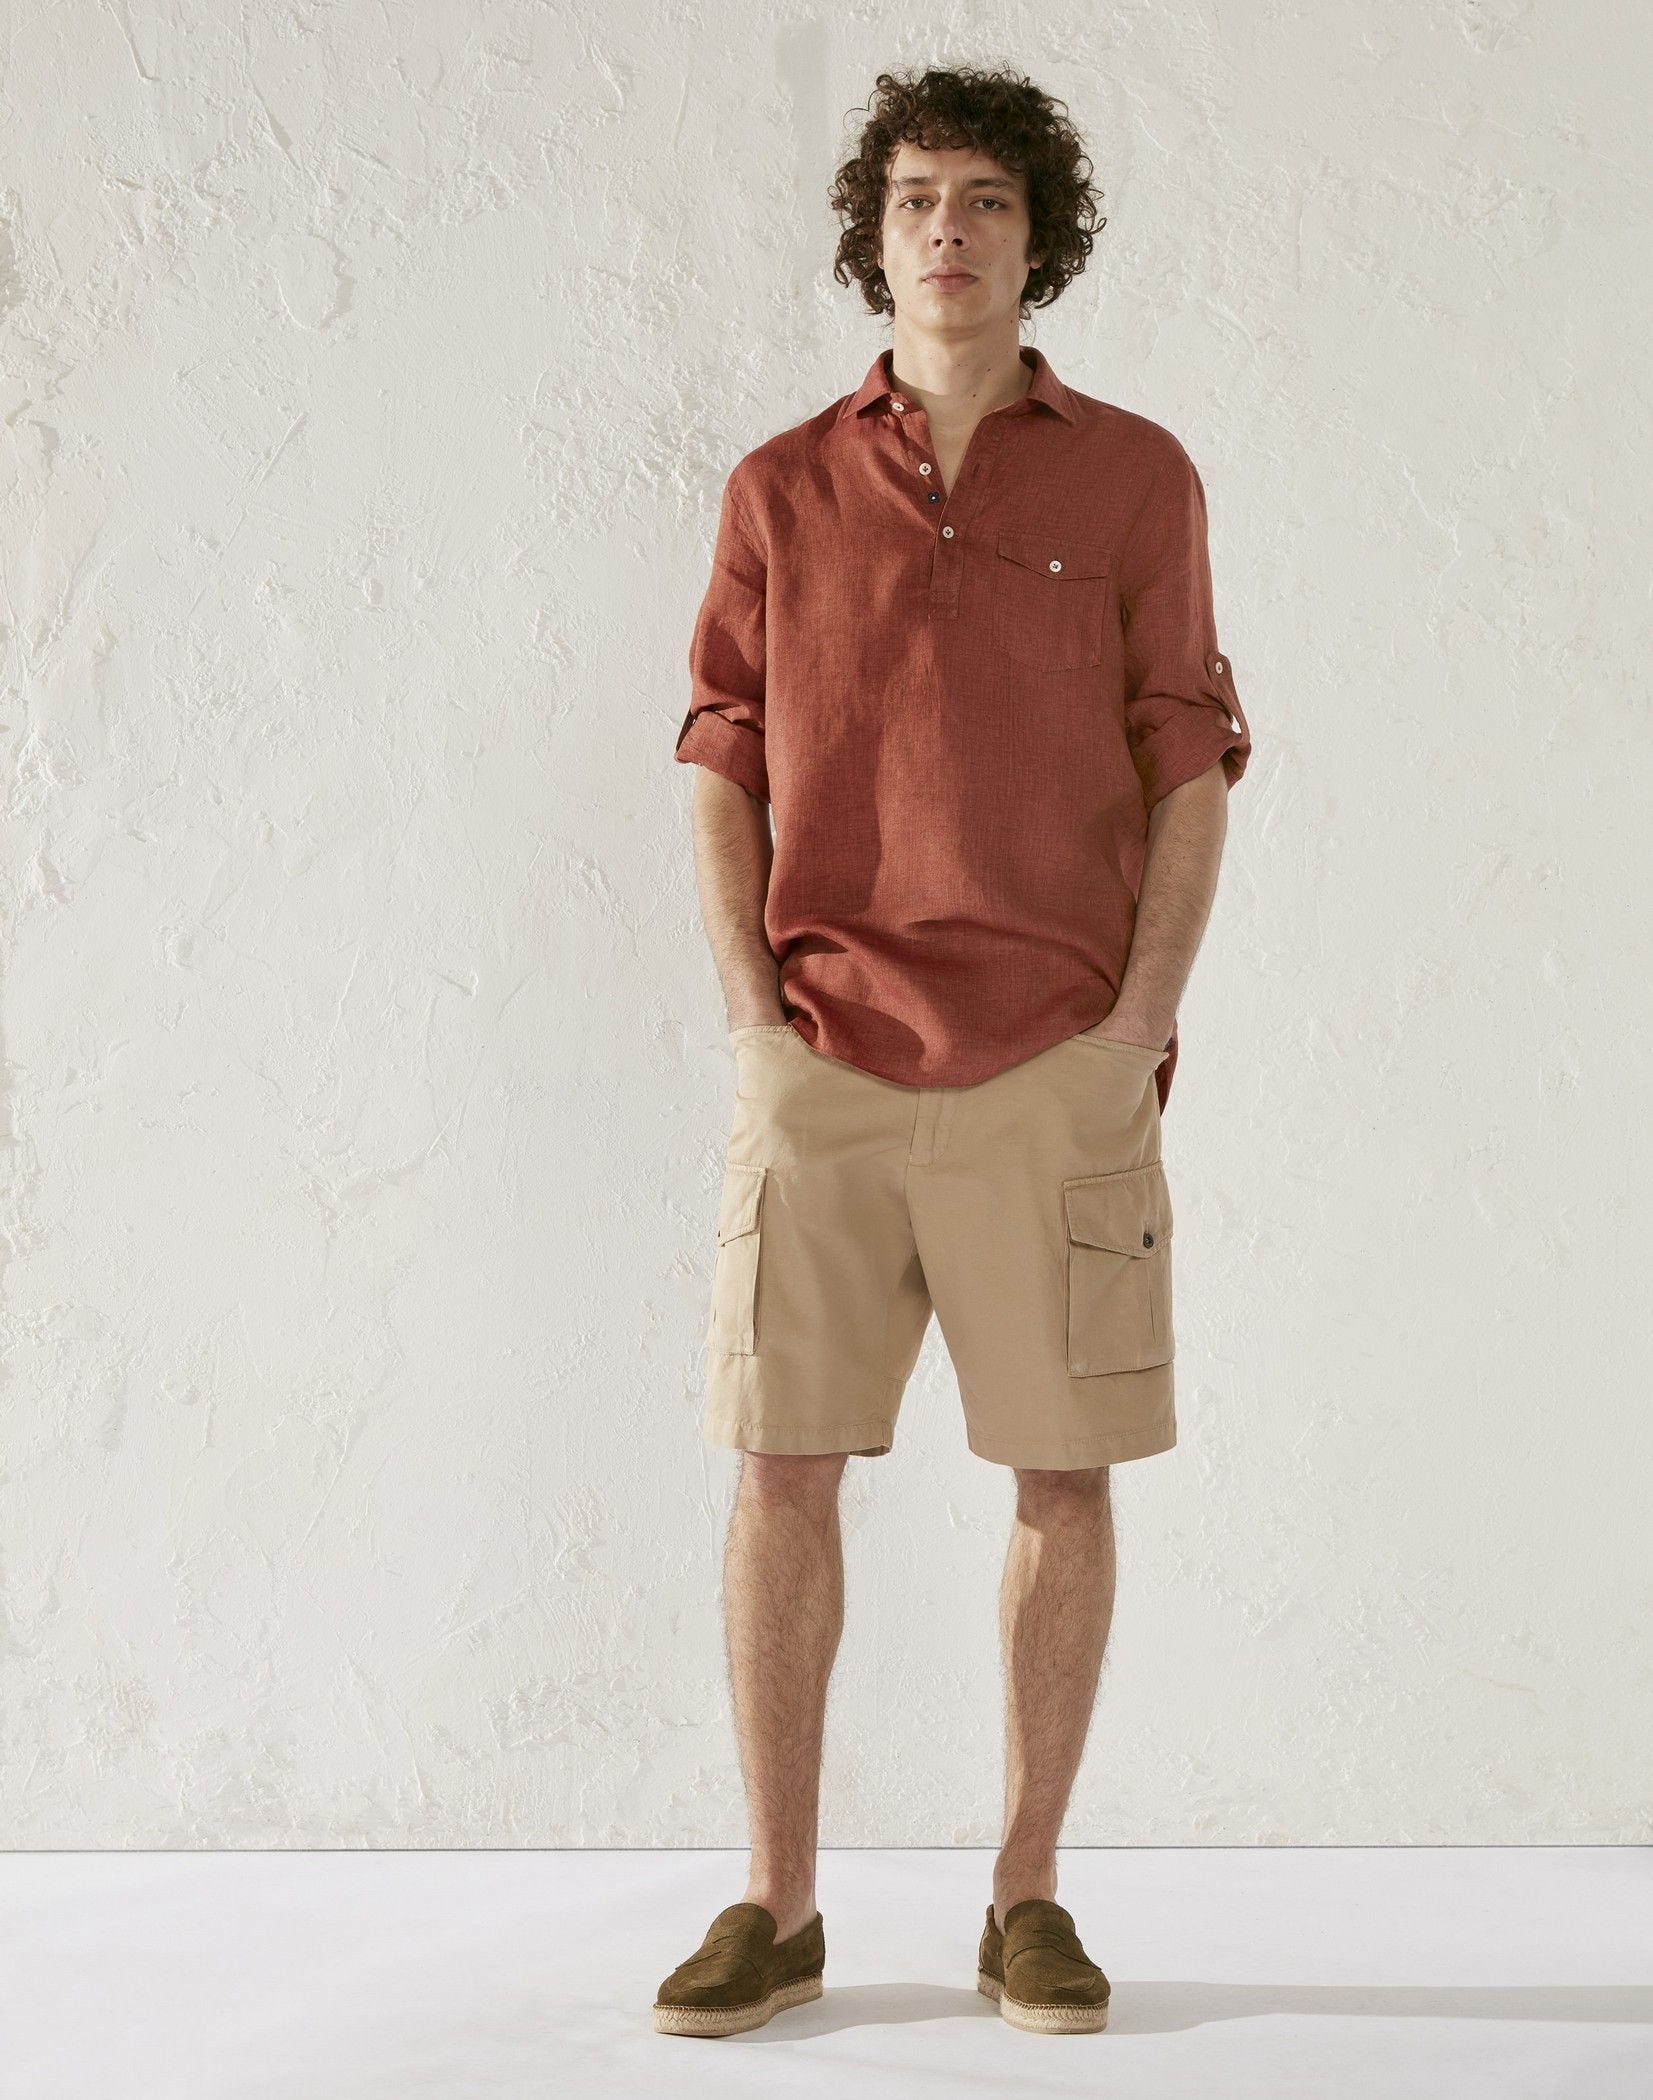 Beige cotton and linen military Bermuda shorts